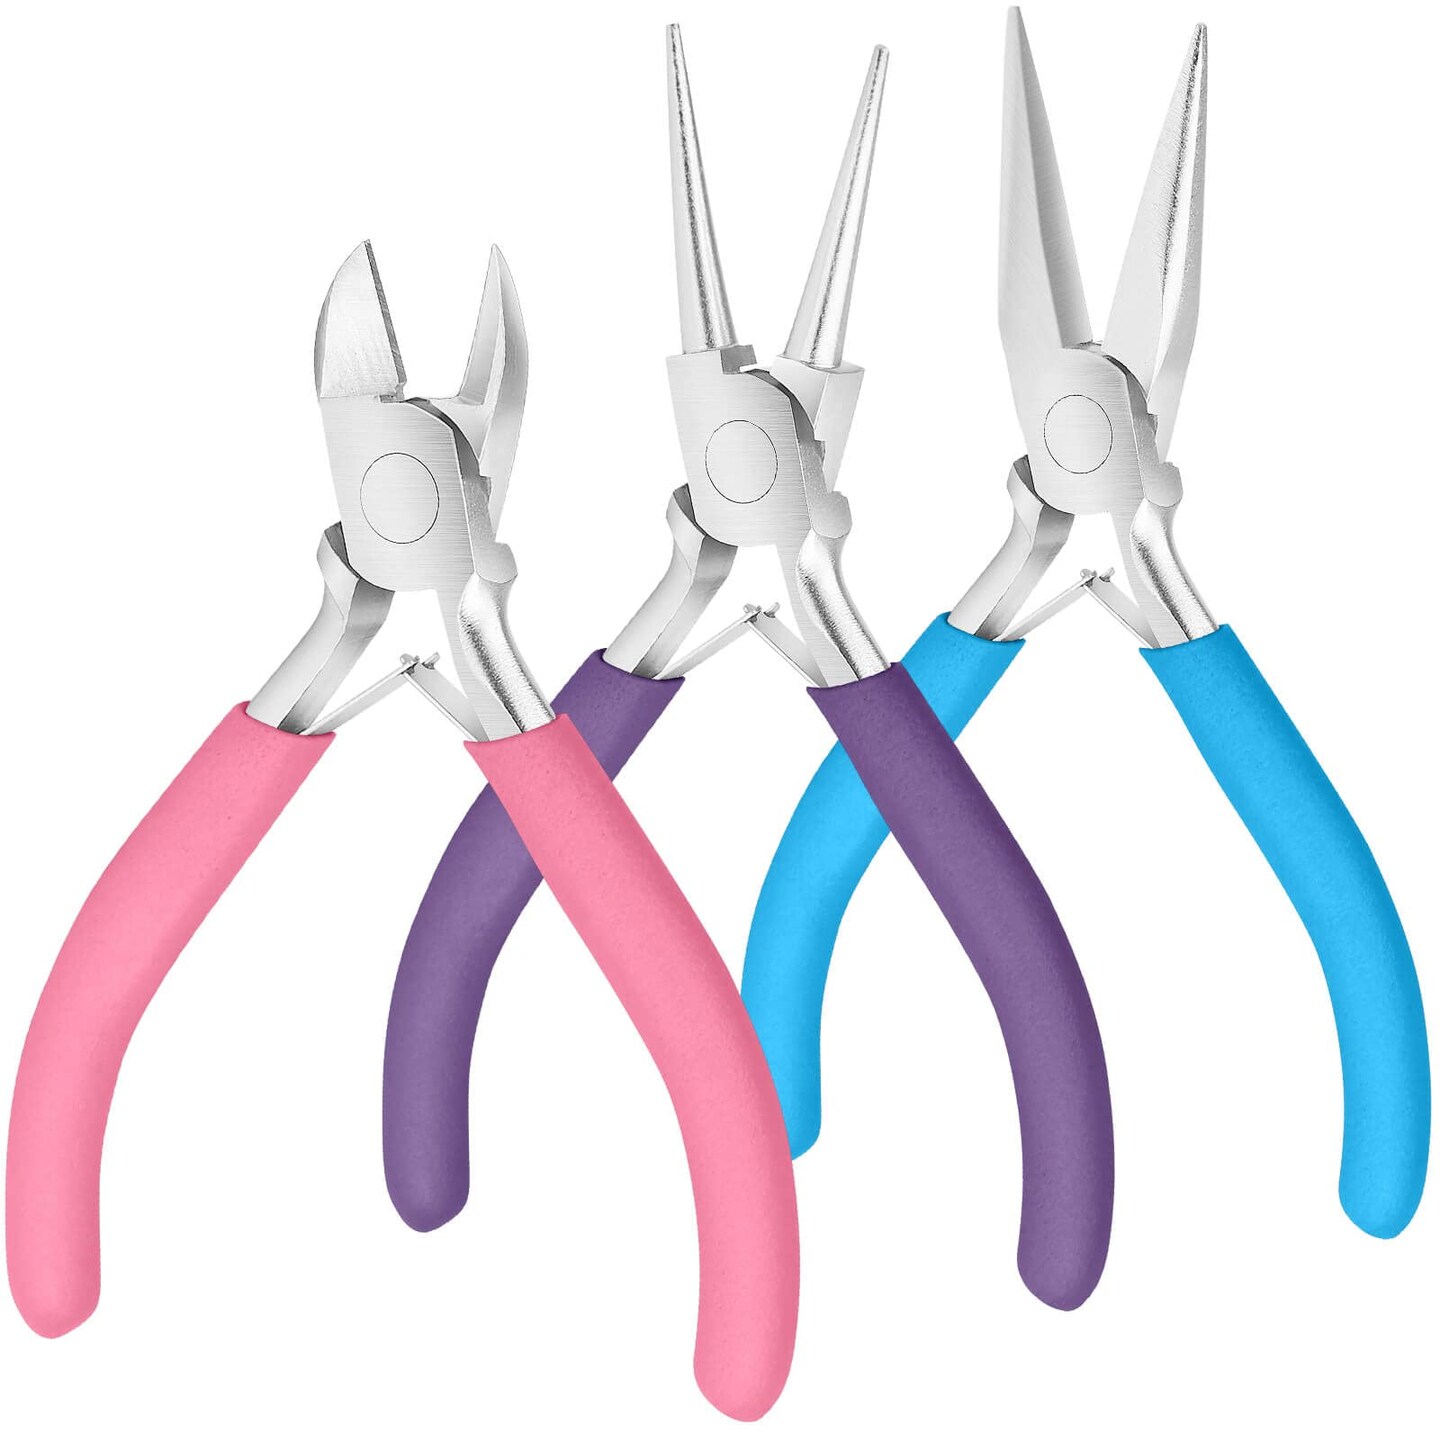 Mini Pliers Set and Jewelry Pliers Set Bundle, Wire Pliers for Jewelry  Making Wire Wrapping Beading Repairing Tool